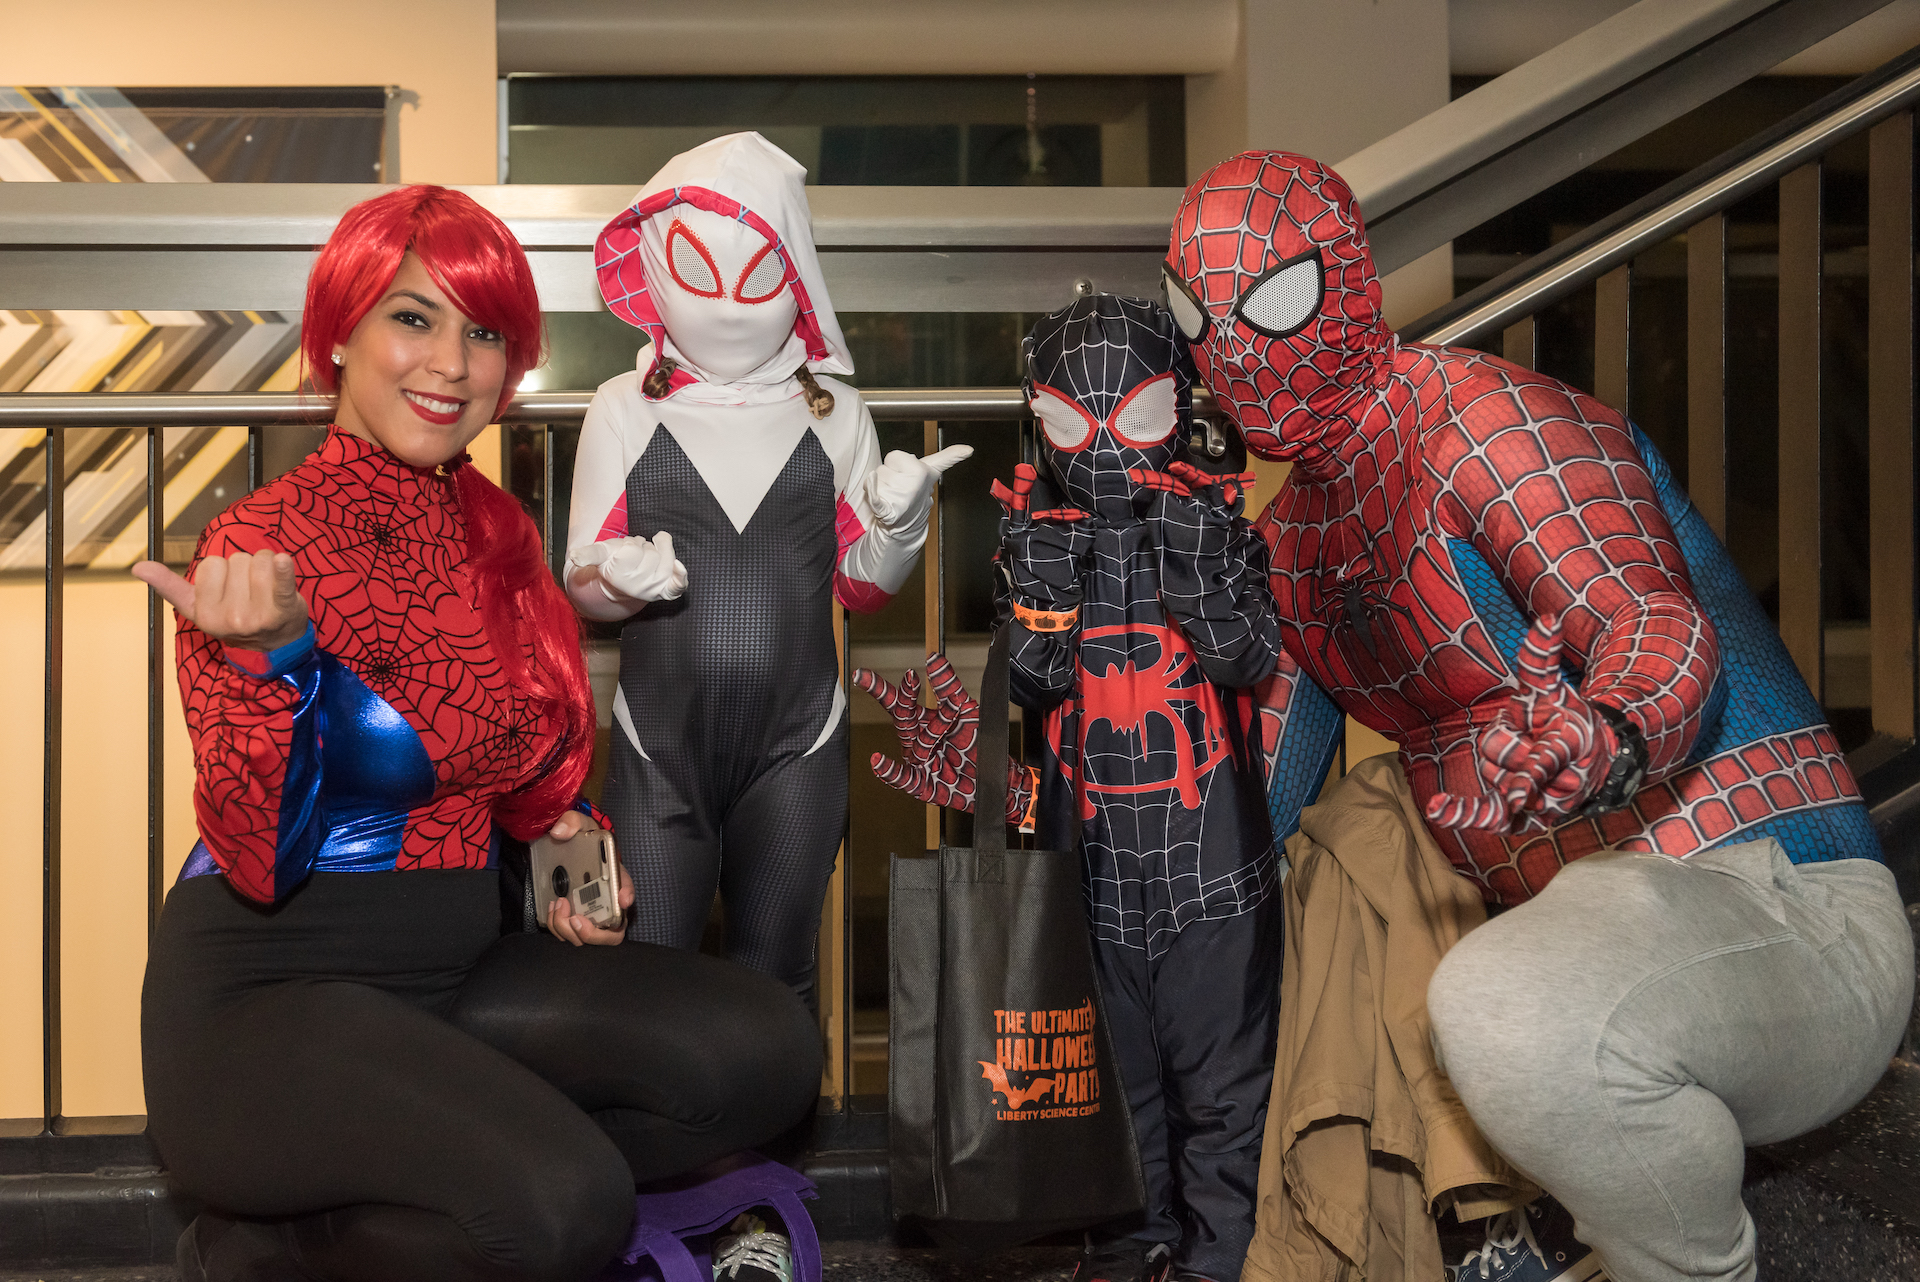 Guests in Spider-Man costumes